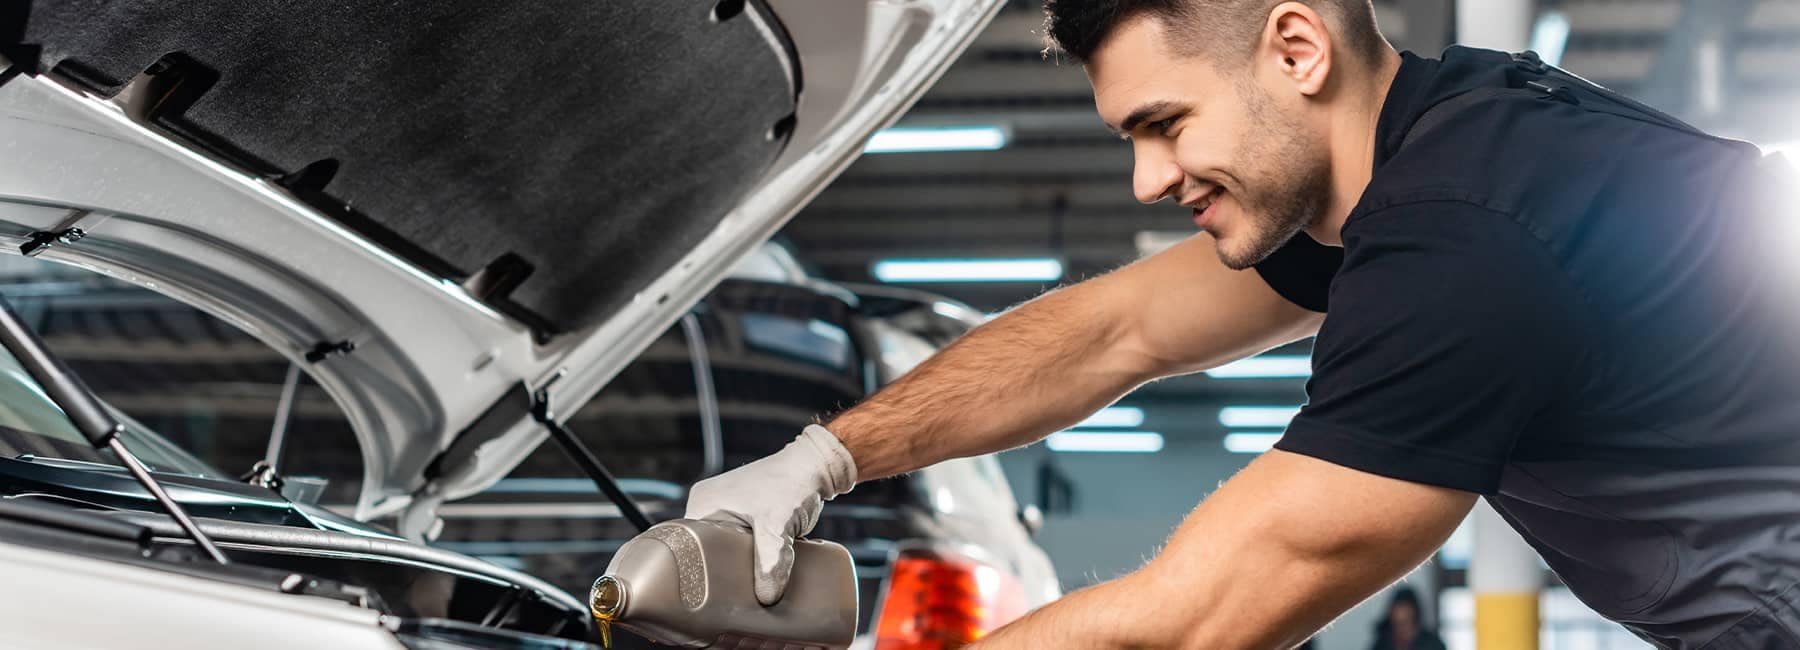 Mechanic replacing engine oil in a vehicle